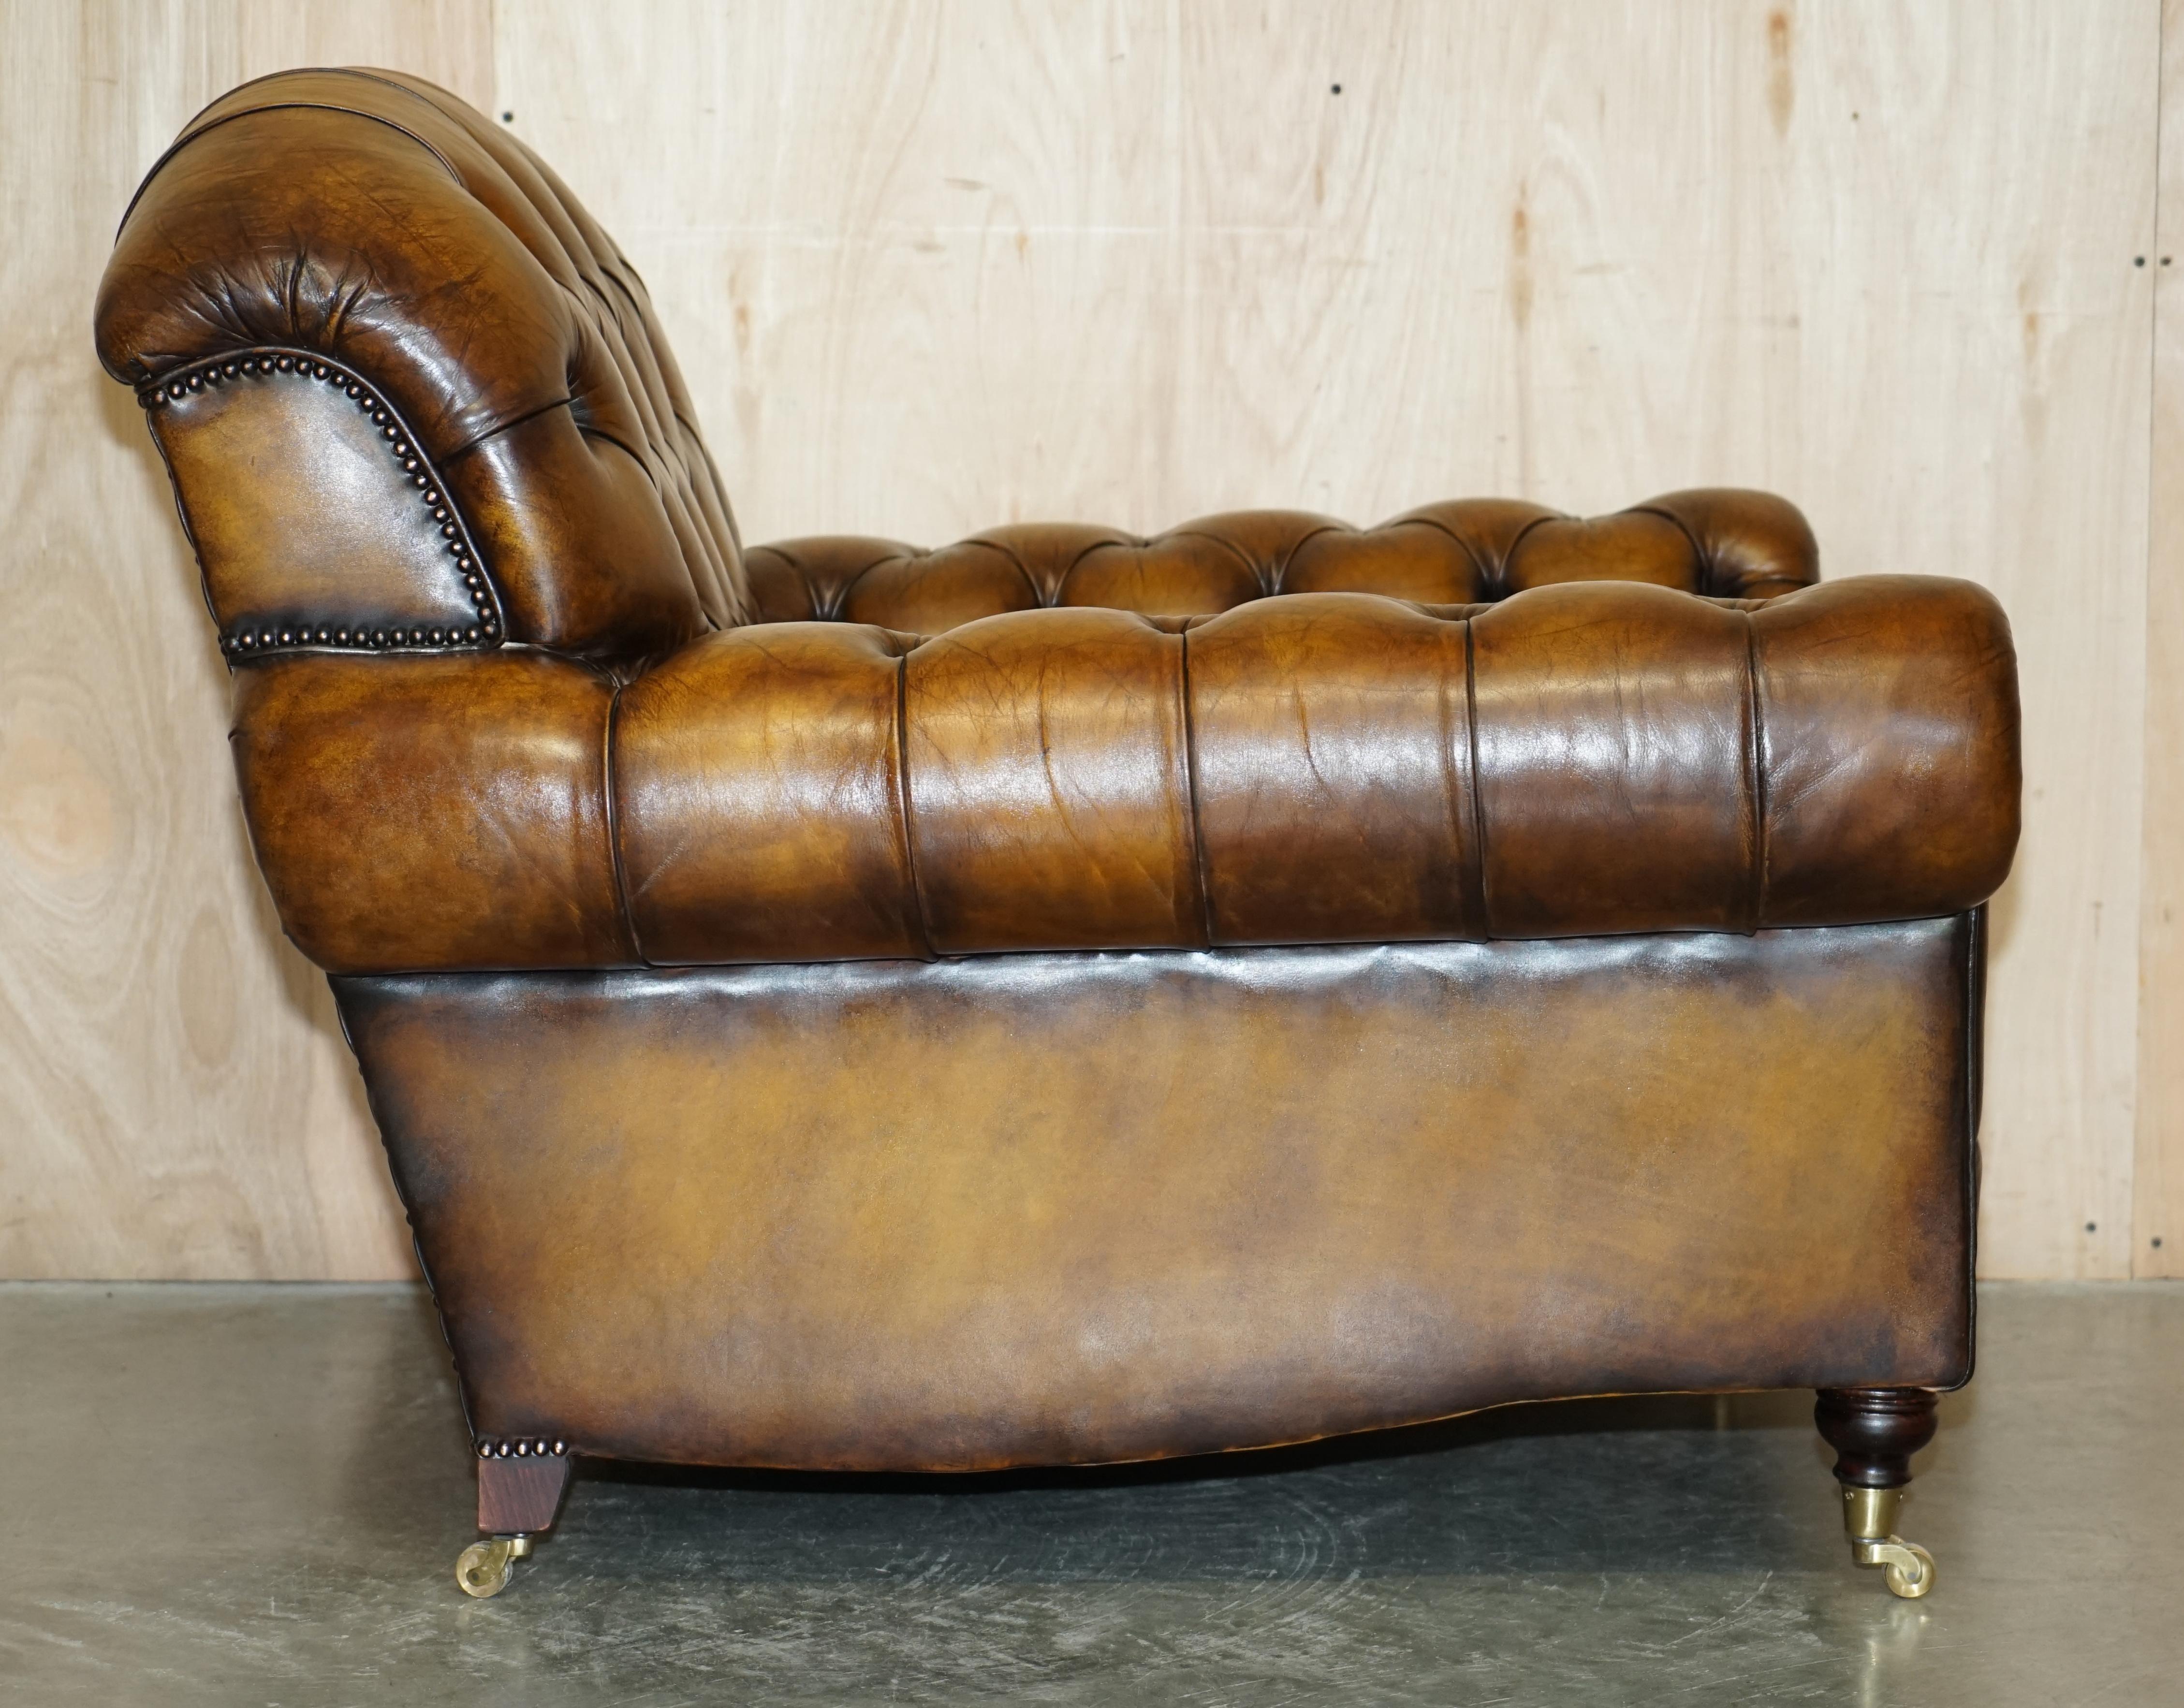 PAIR OF FULLY RESTORED GEORGE SMiTH BULGARU BROWN LEATHER CHESTERFIELD ARMCHAIRS For Sale 10